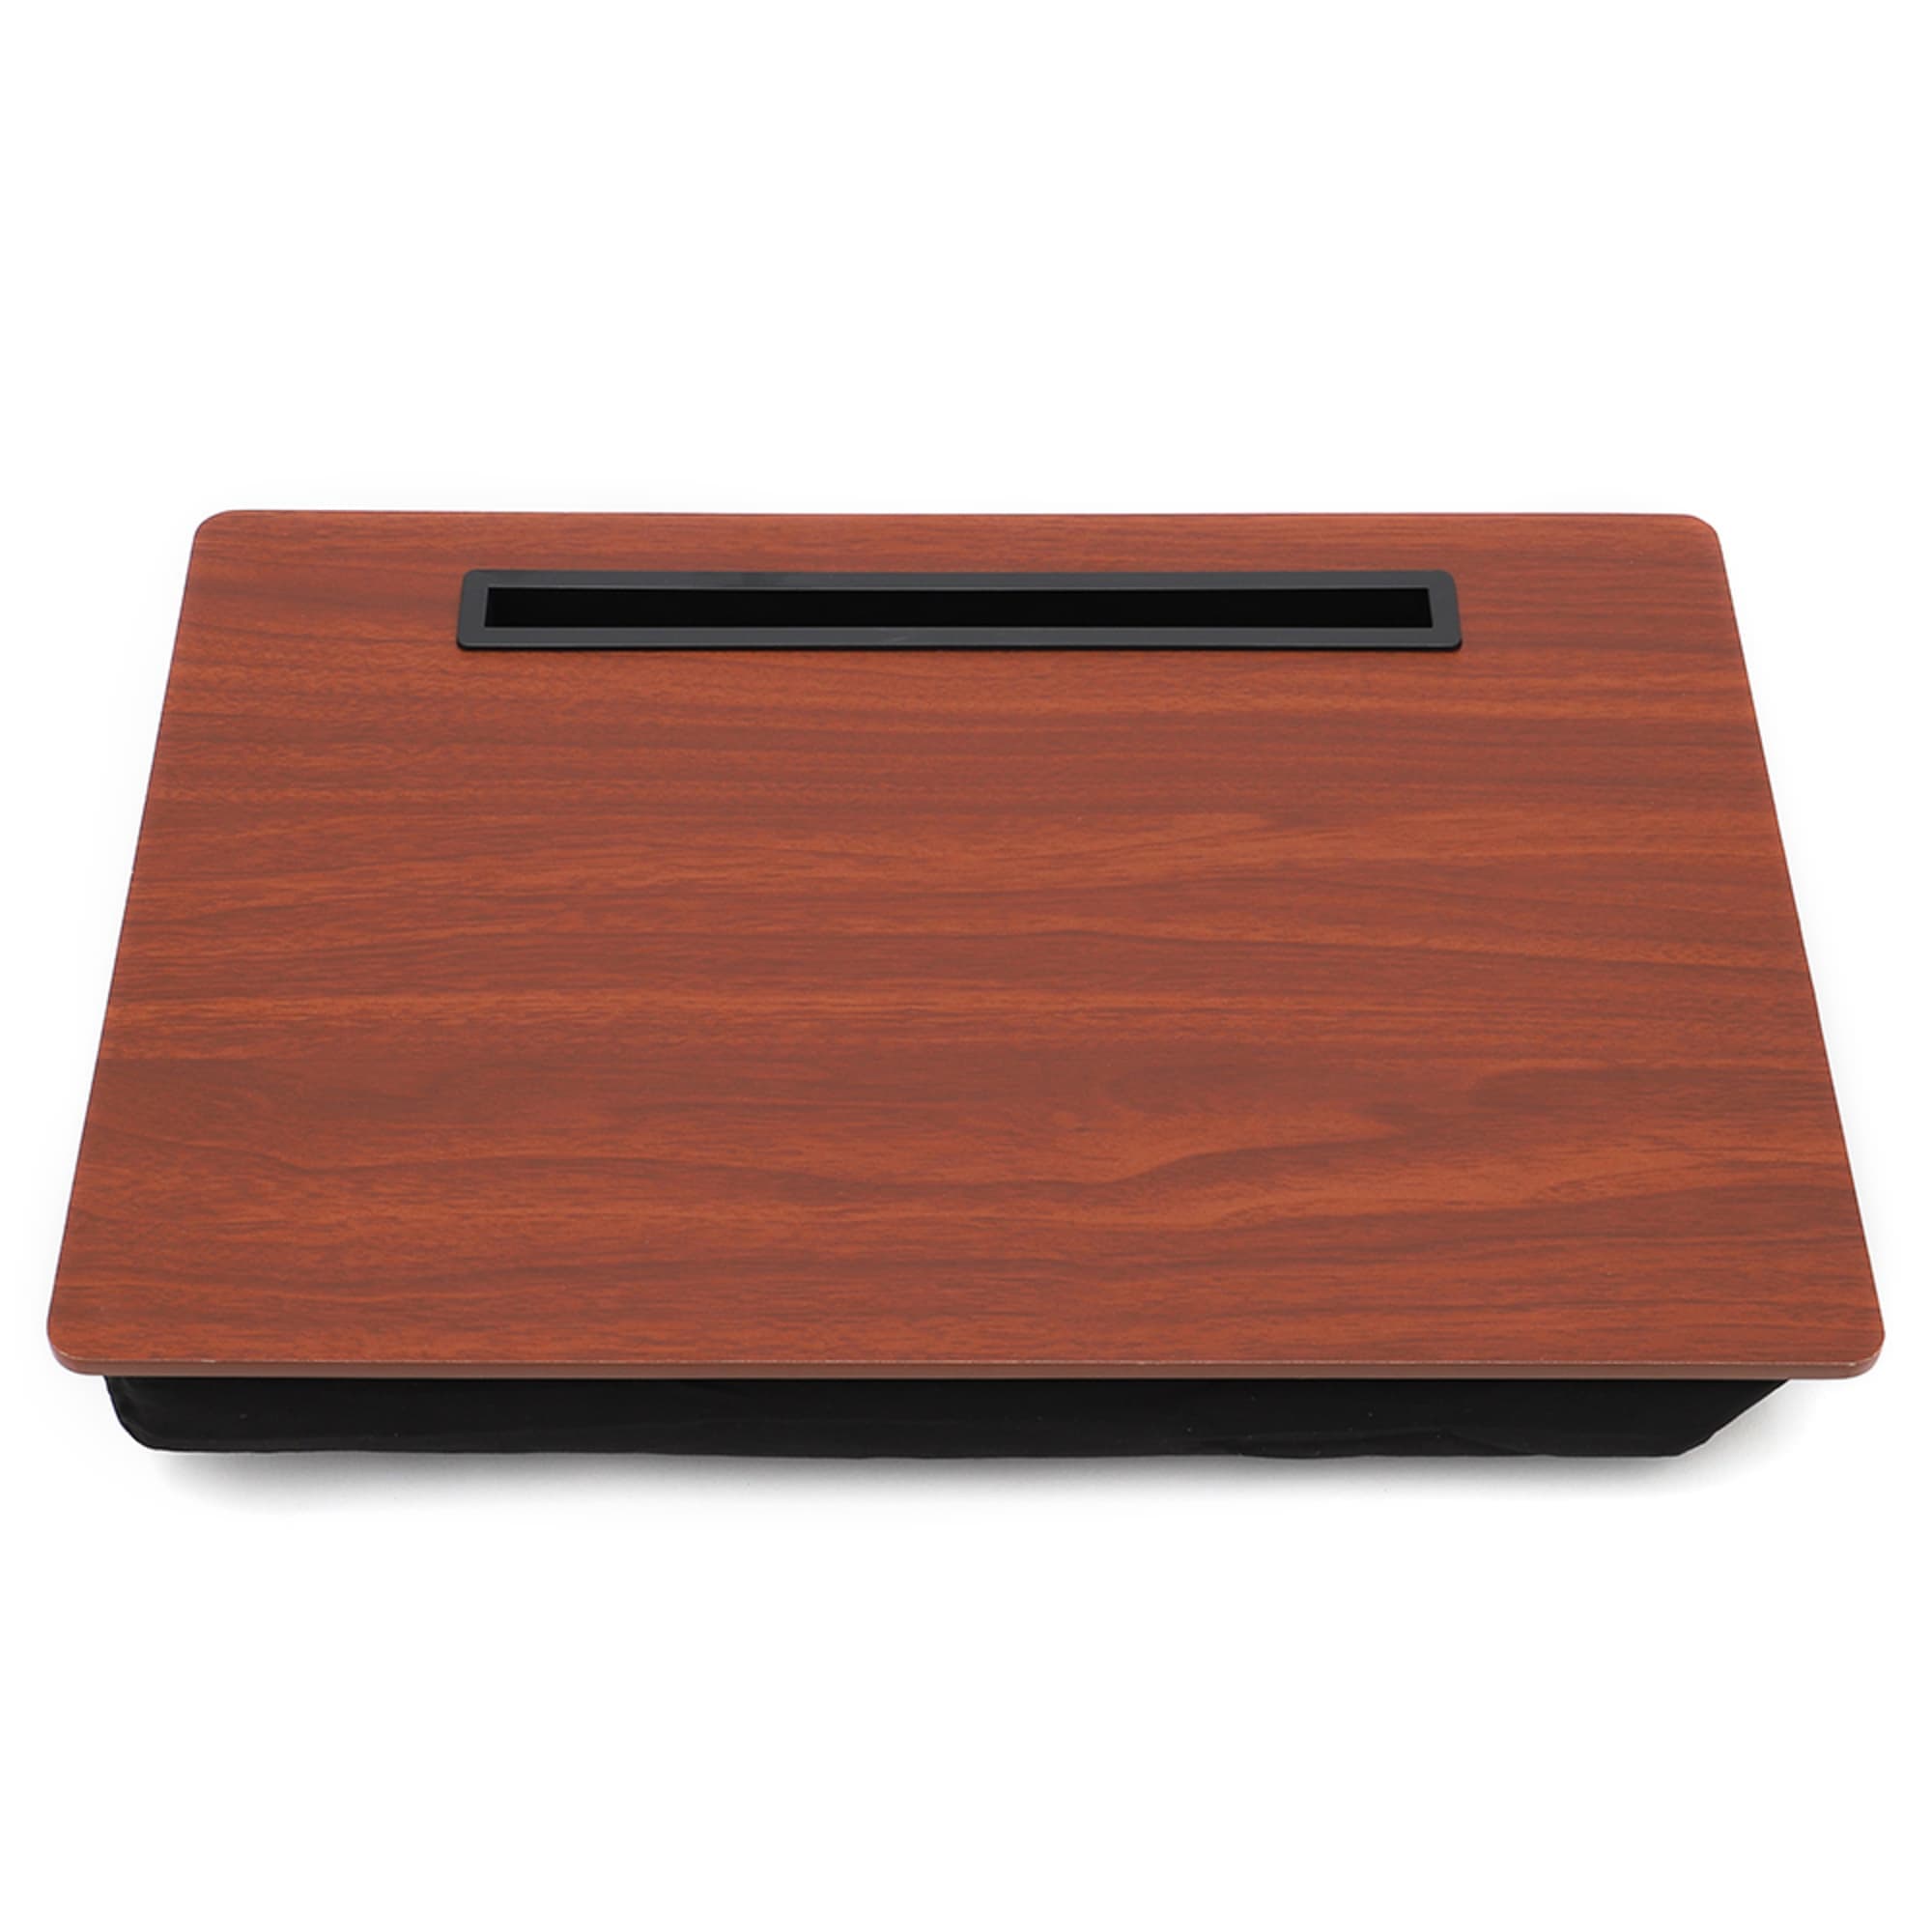 Home Basics Lap Desk with Cushioned Back, Cherry $12.00 EACH, CASE PACK OF 6